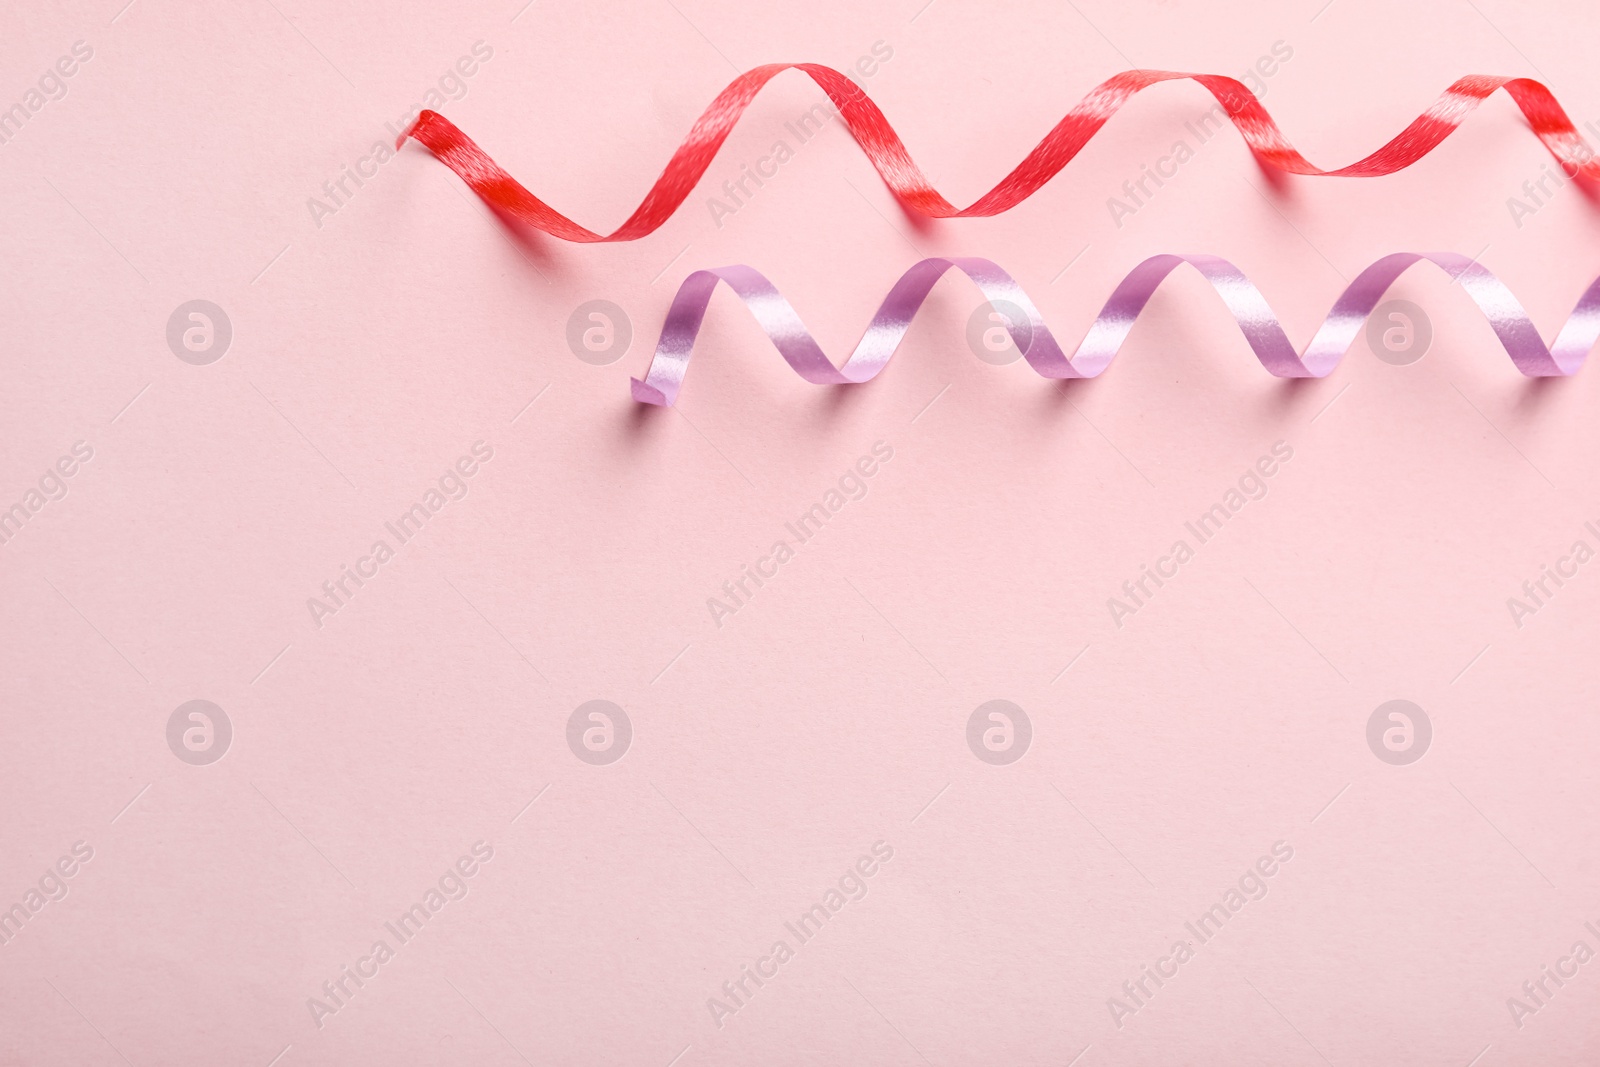 Photo of Colorful serpentine streamers on pink background, flat lay. Space for text